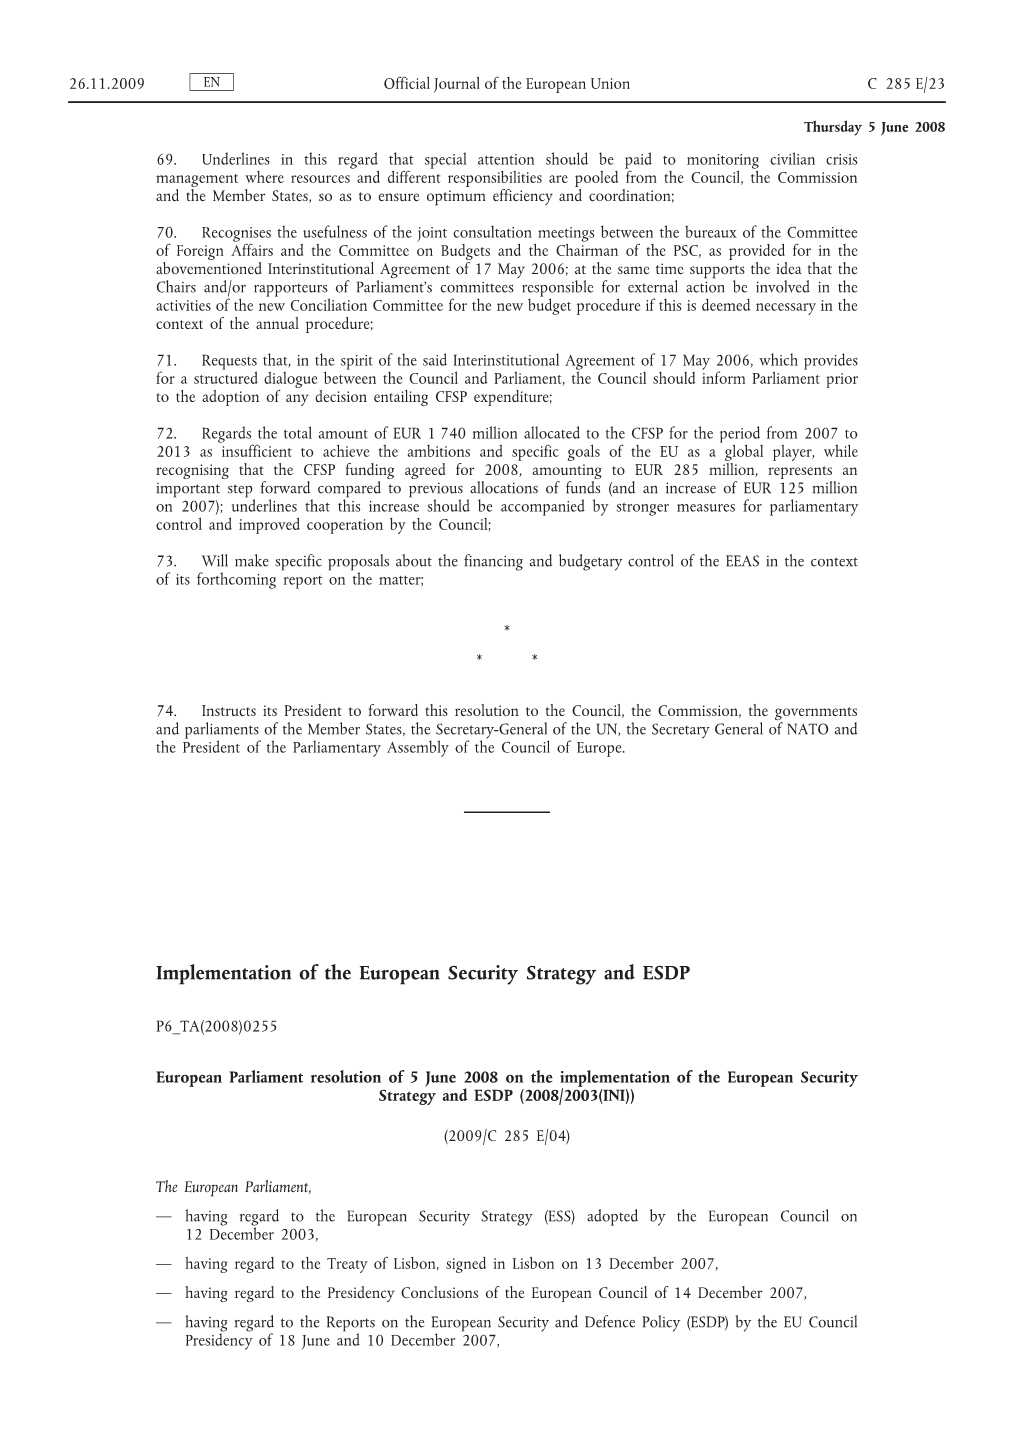 Implementation of the European Security Strategy and ESDP